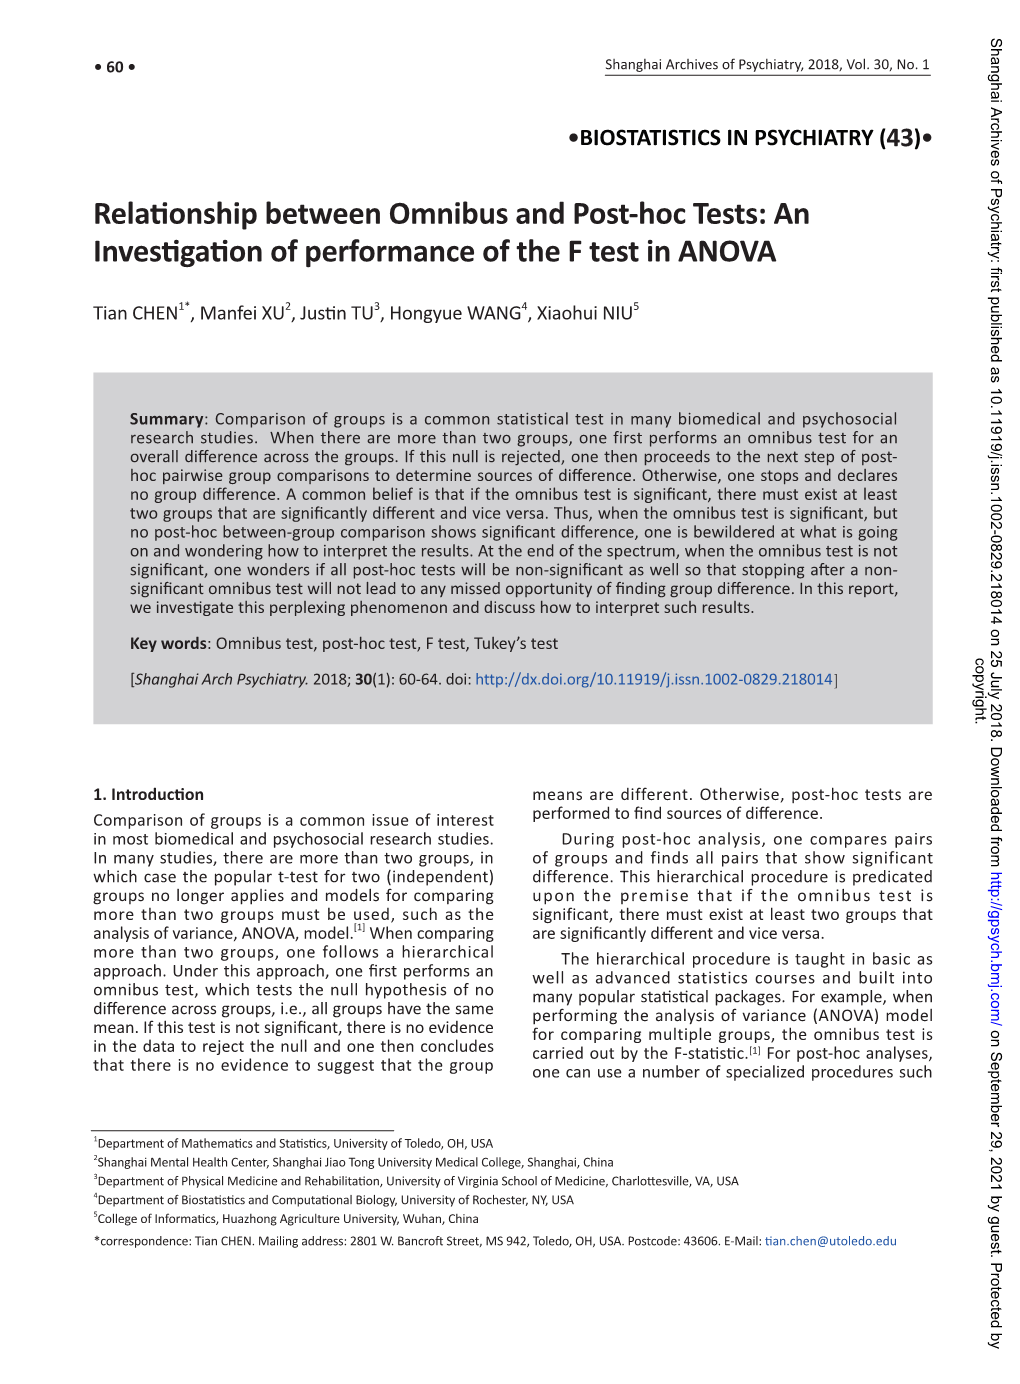 Relationship Between Omnibus and Post-Hoc Tests: an Investigation of Performance of the F Test in ANOVA